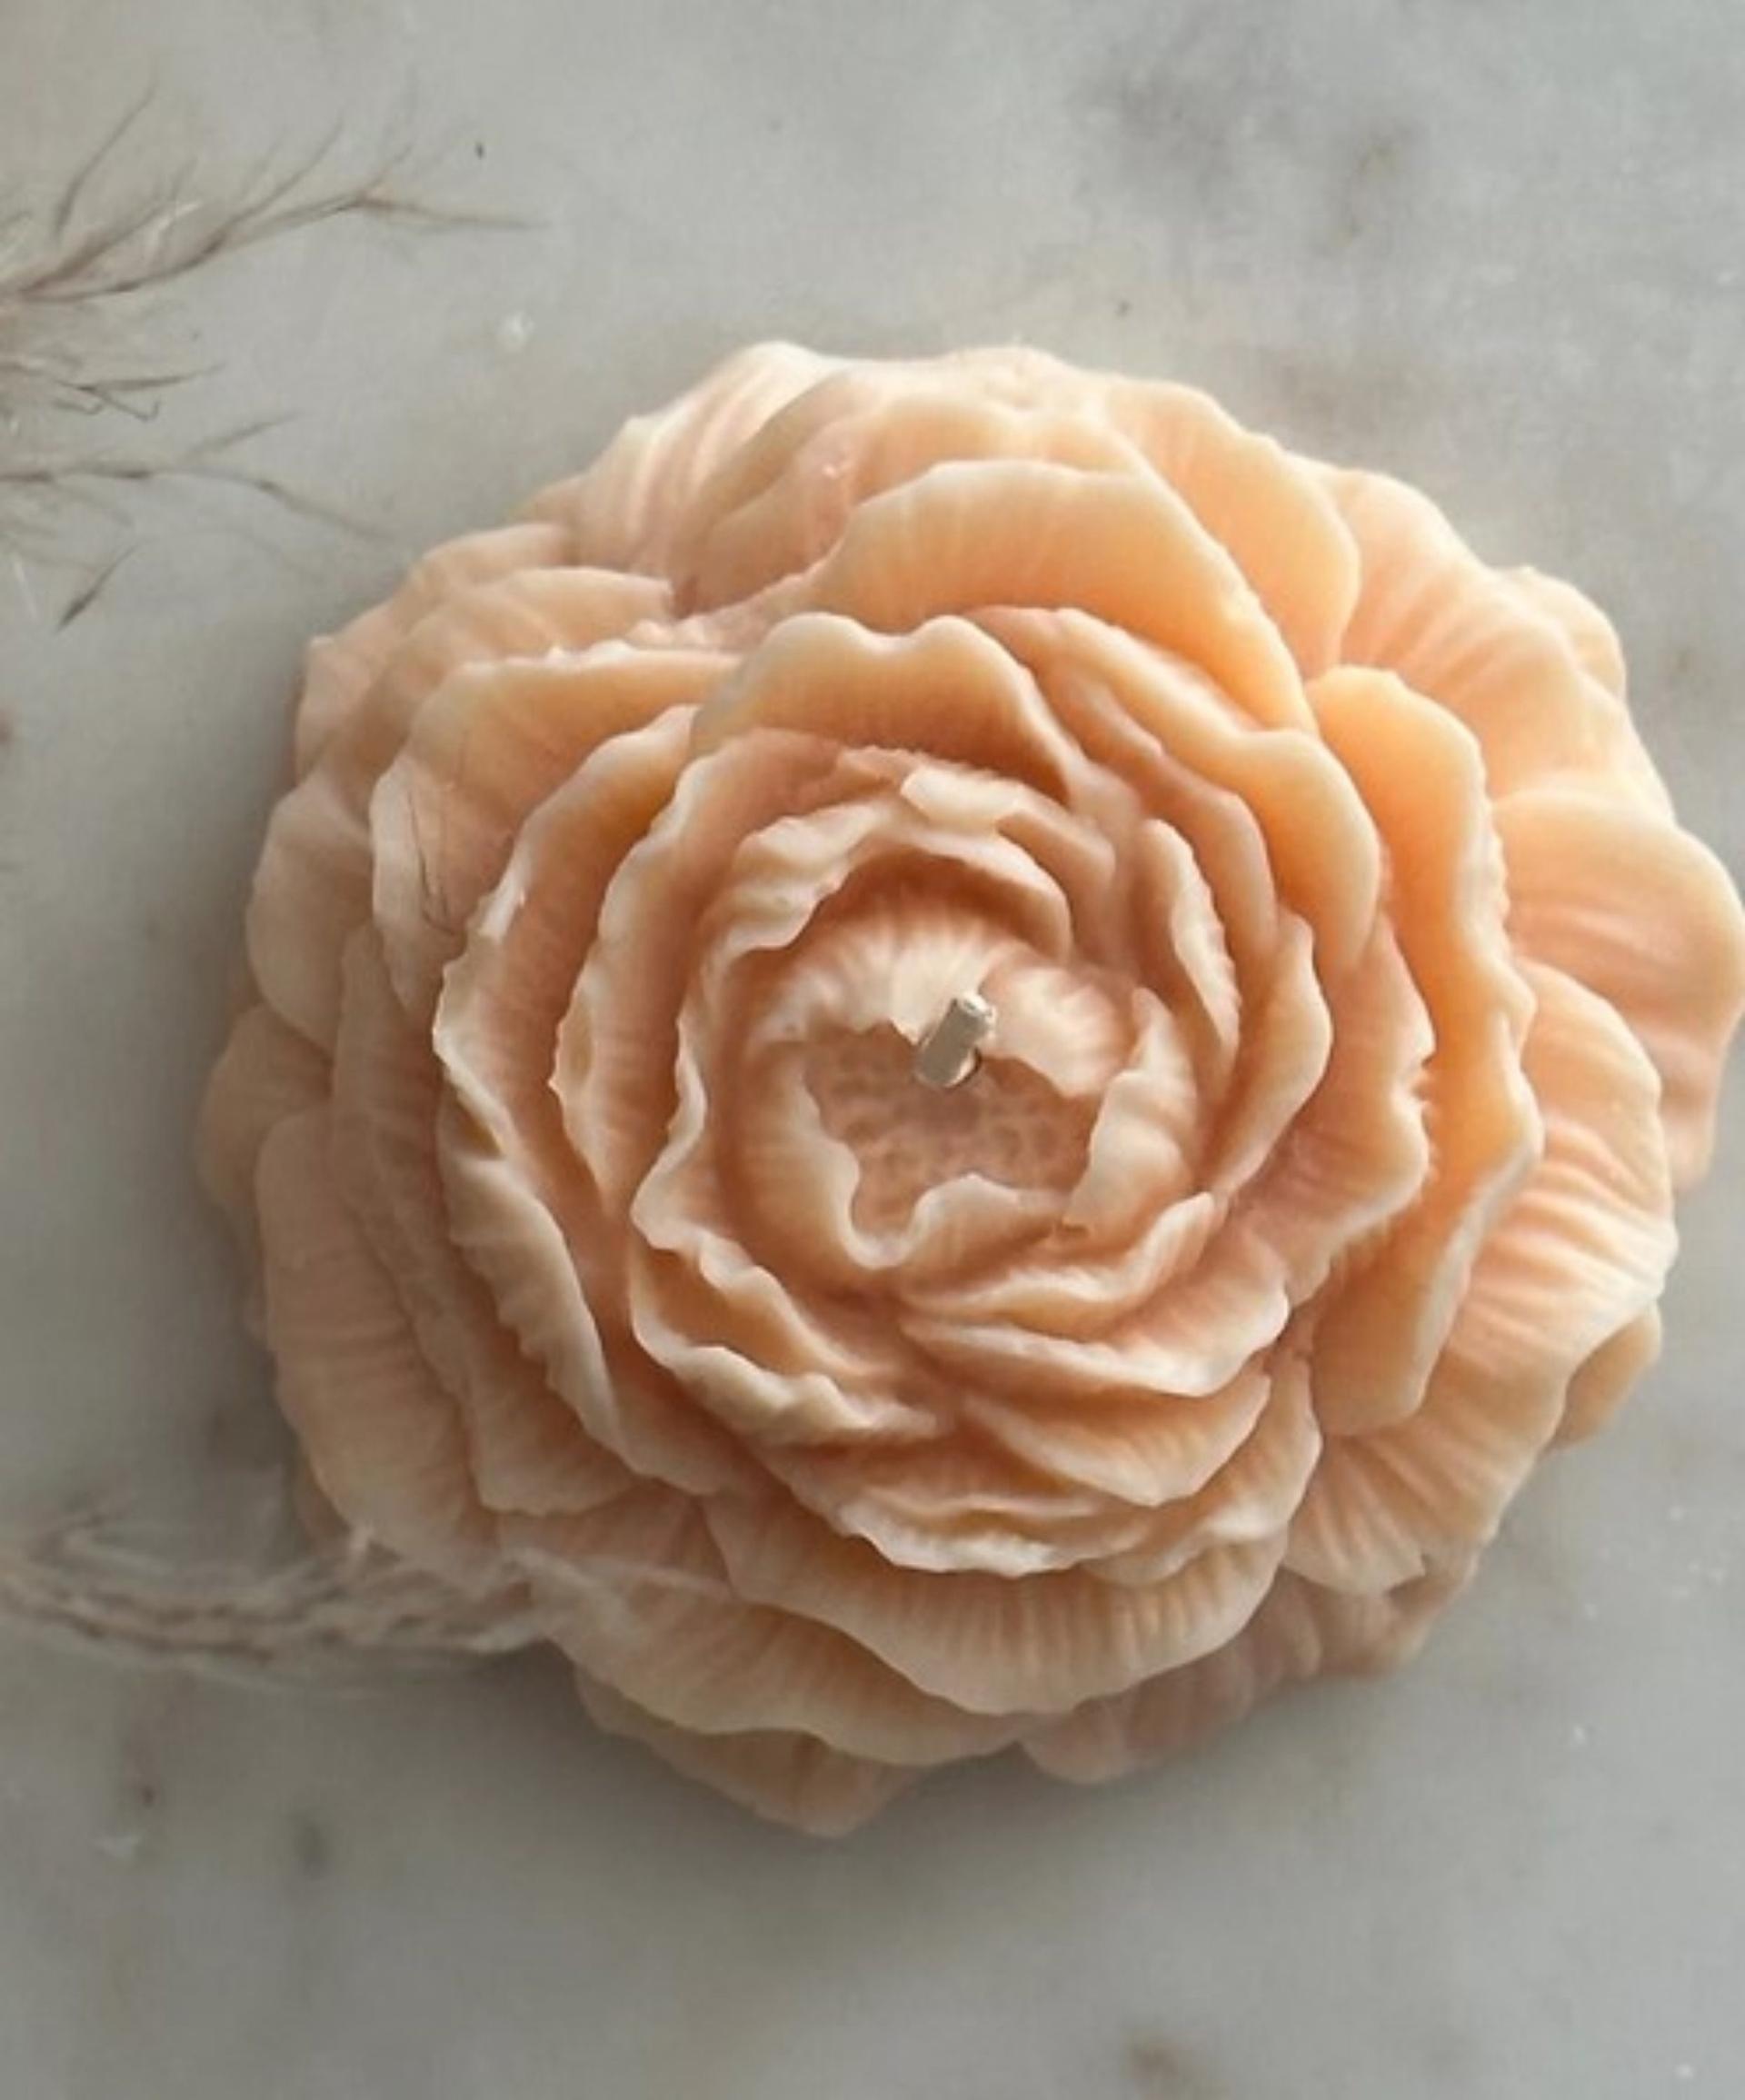 Peony - Casting Molds - Large Flower - Candle Mold, Soap Mold or for Clay, Casting and Baking